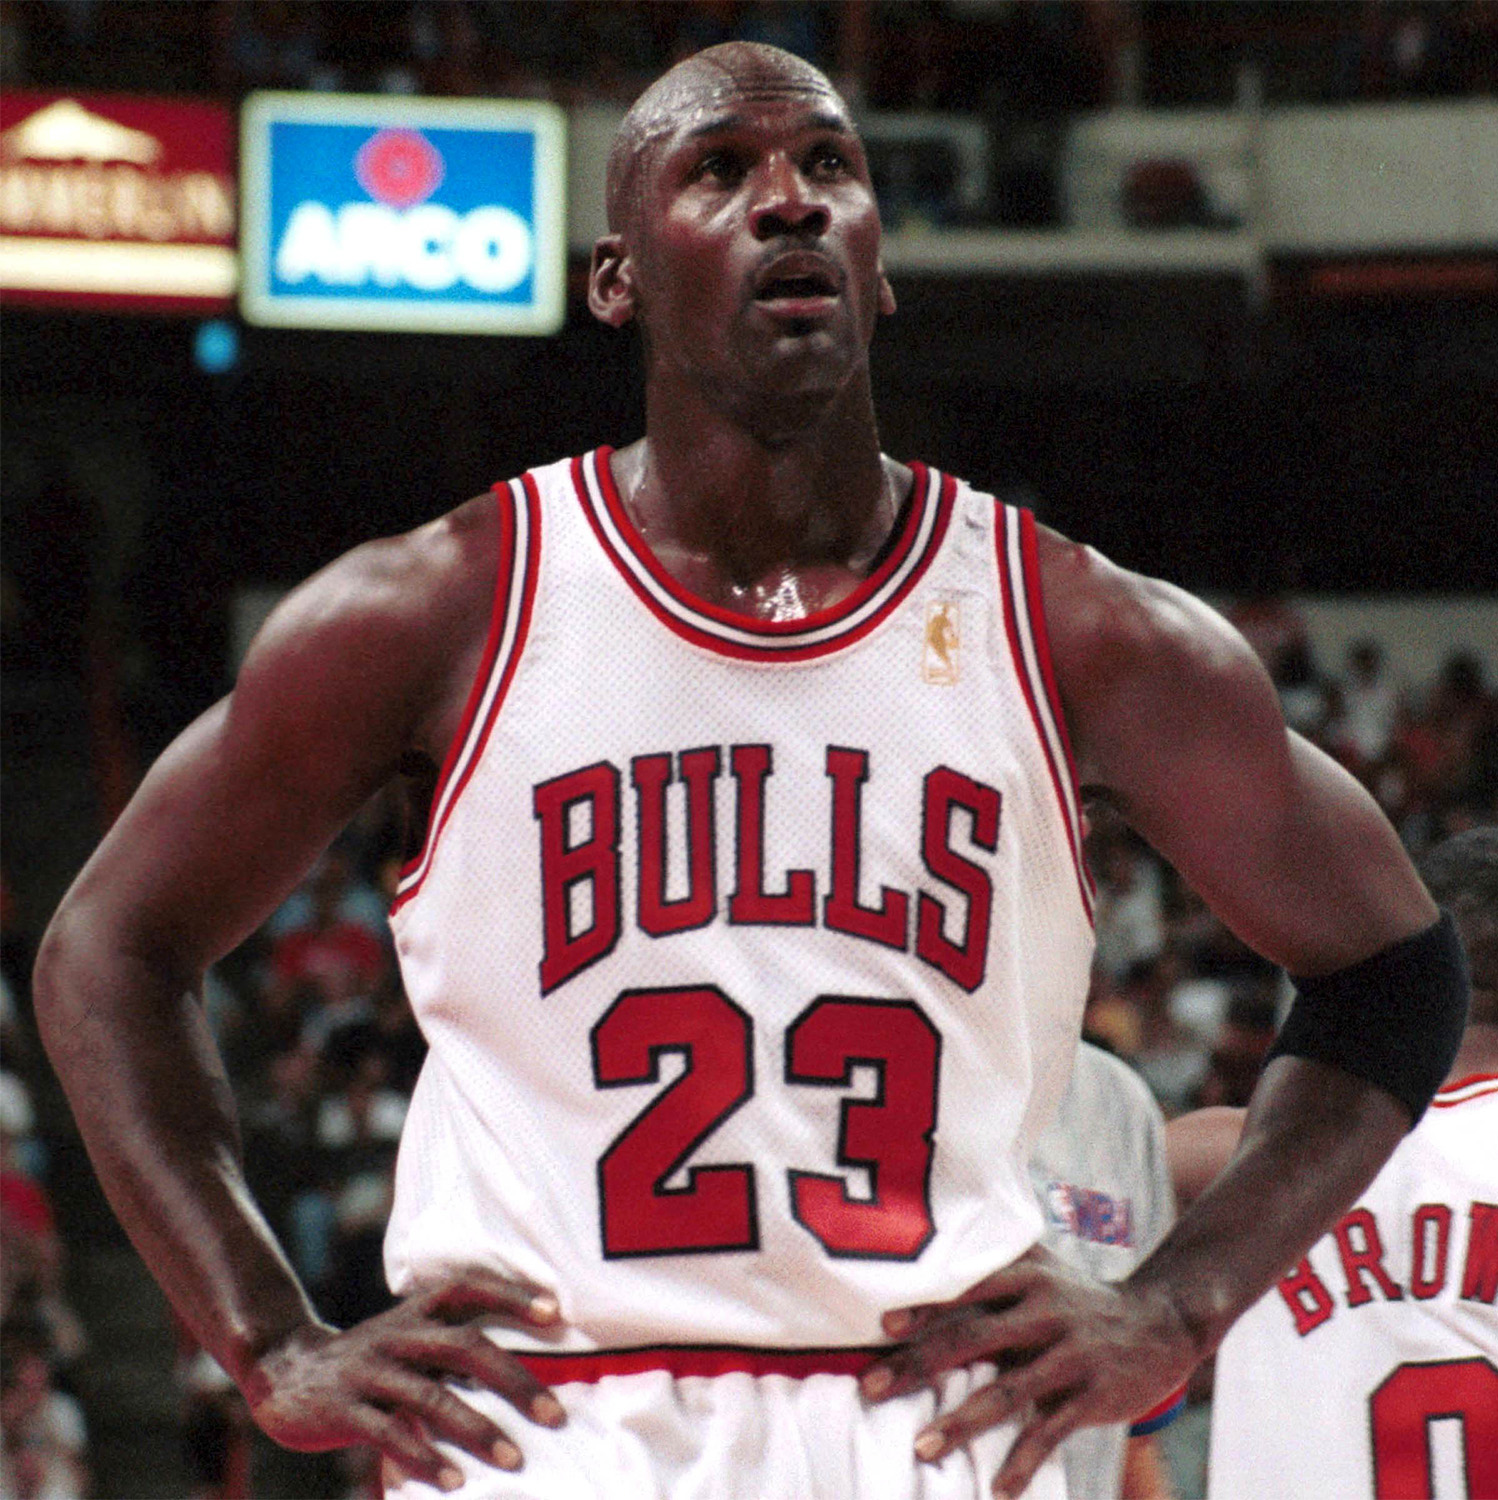 Just how good was Michael Jordan at playing professional